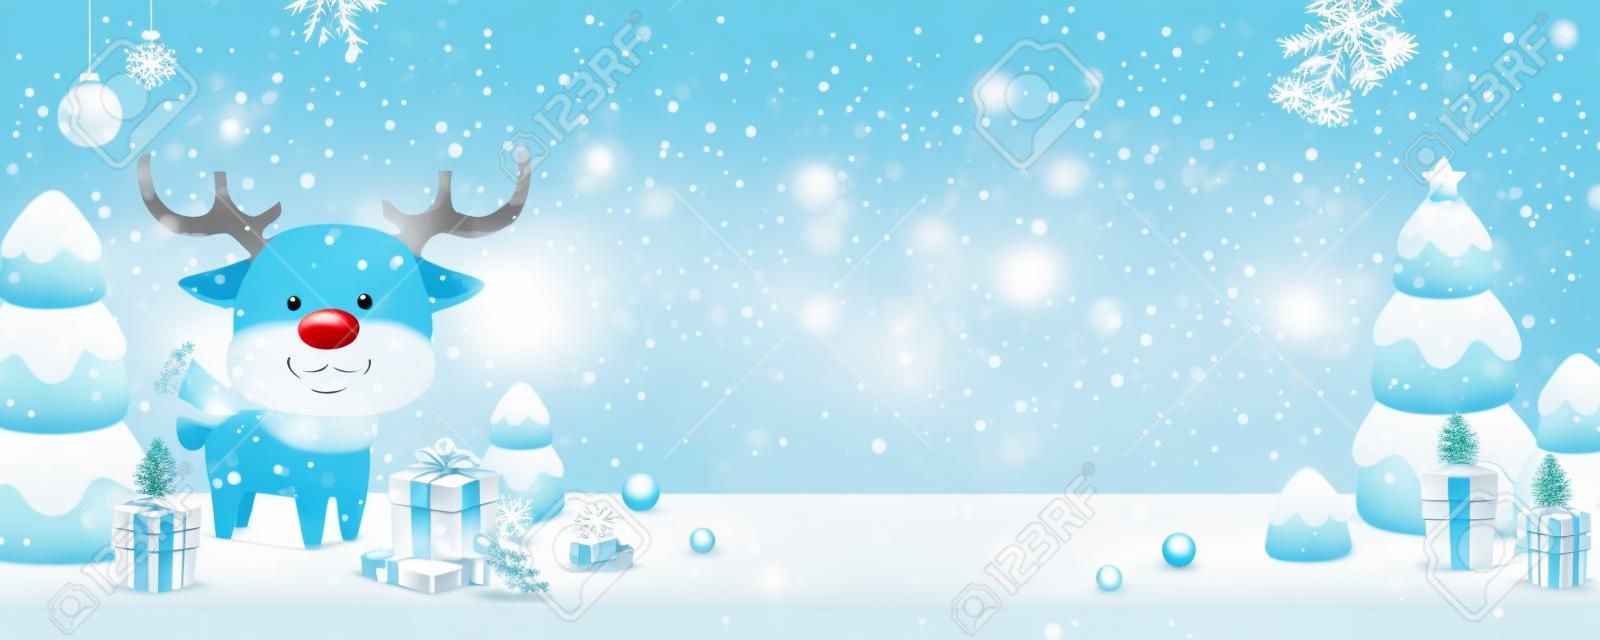 3d Merry Christmas illustration banner in light blue. Cute deer with Christmas trees, bells, gift boxes on the snow surface background